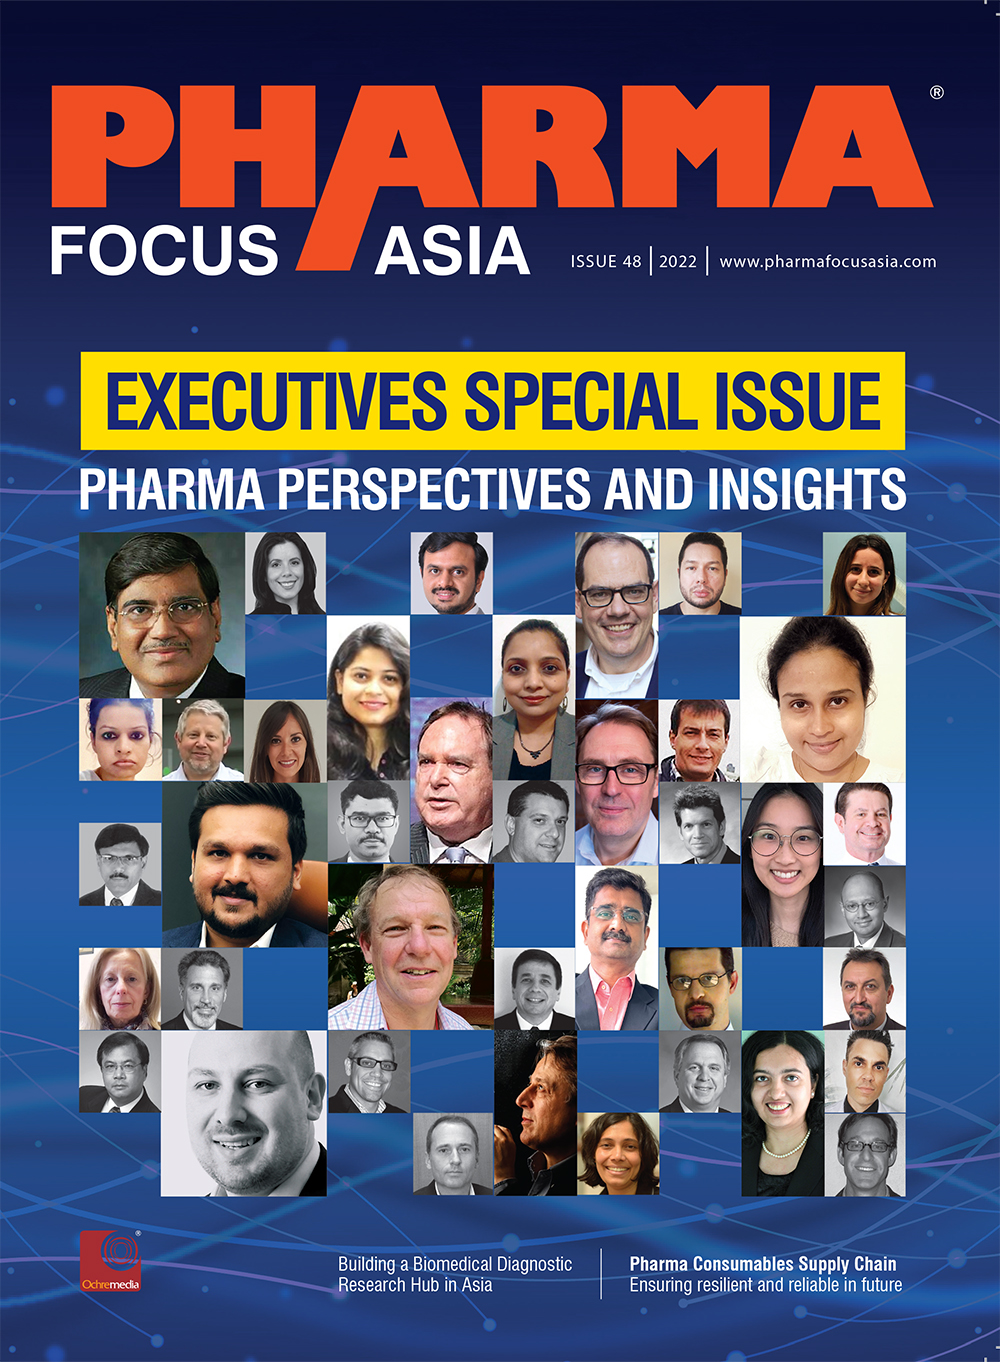 PHARMA PERSPECTIVES AND INSIGHTS